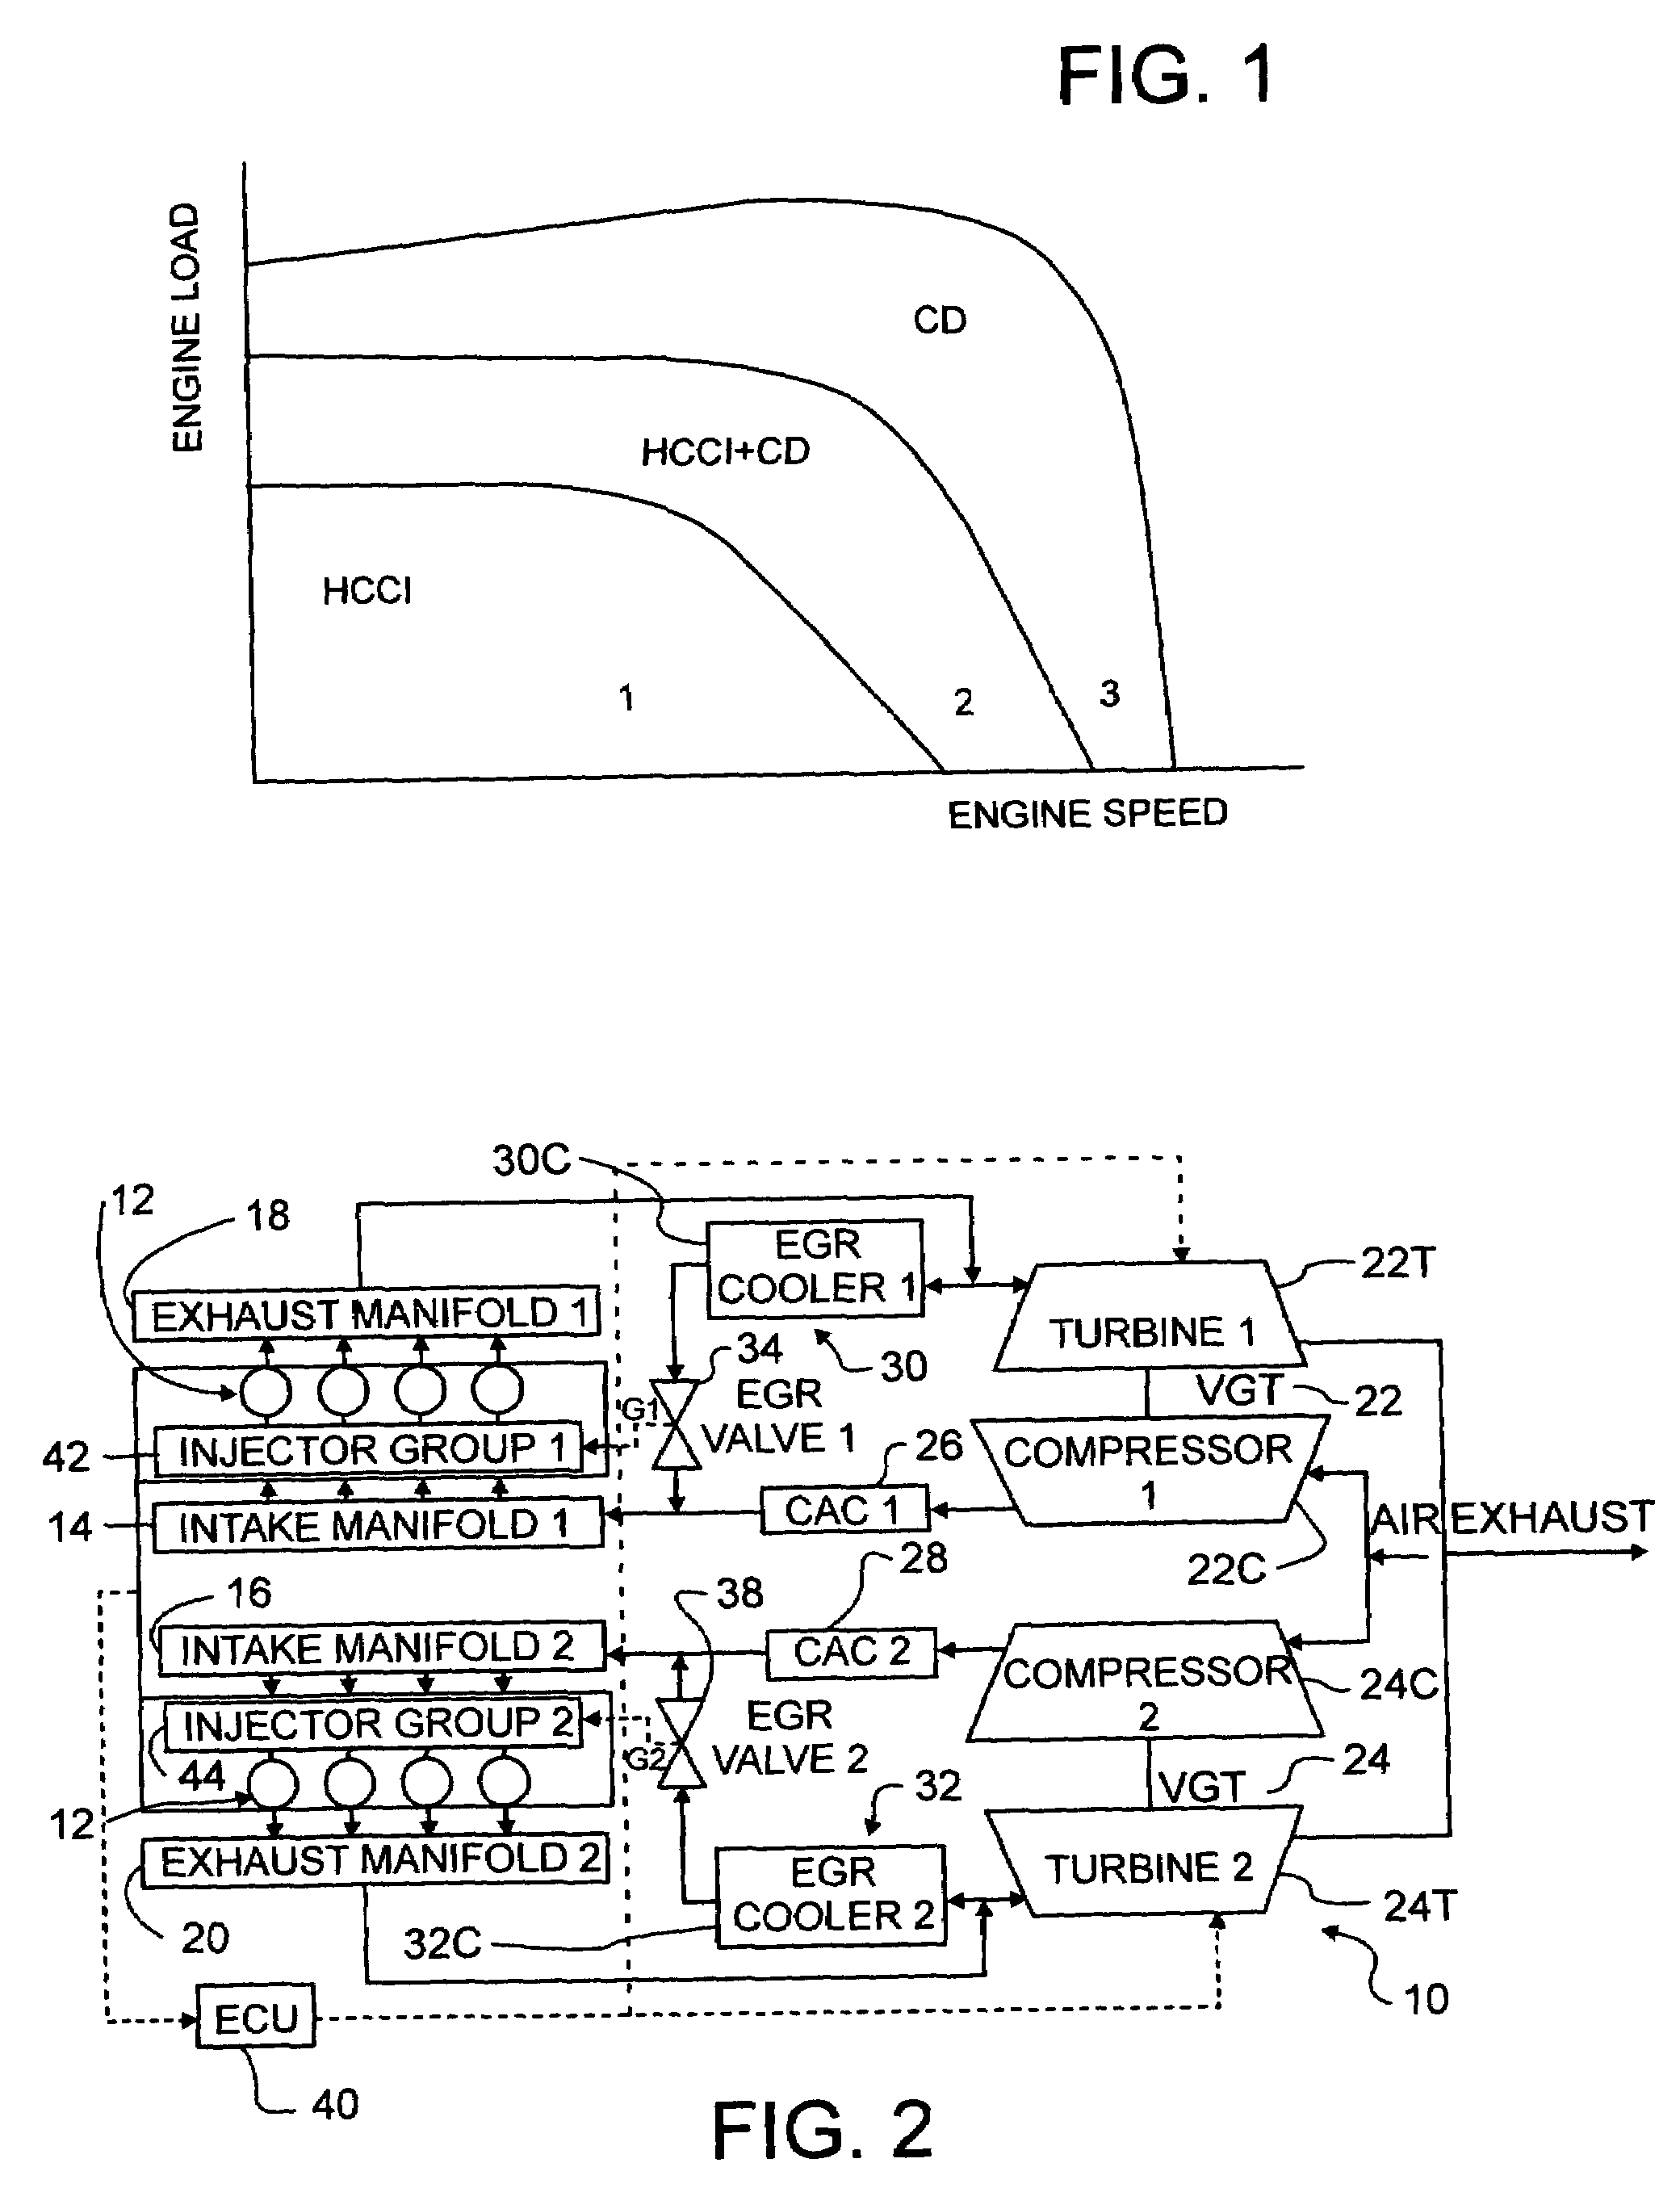 Hybrid combustion in a diesel engine